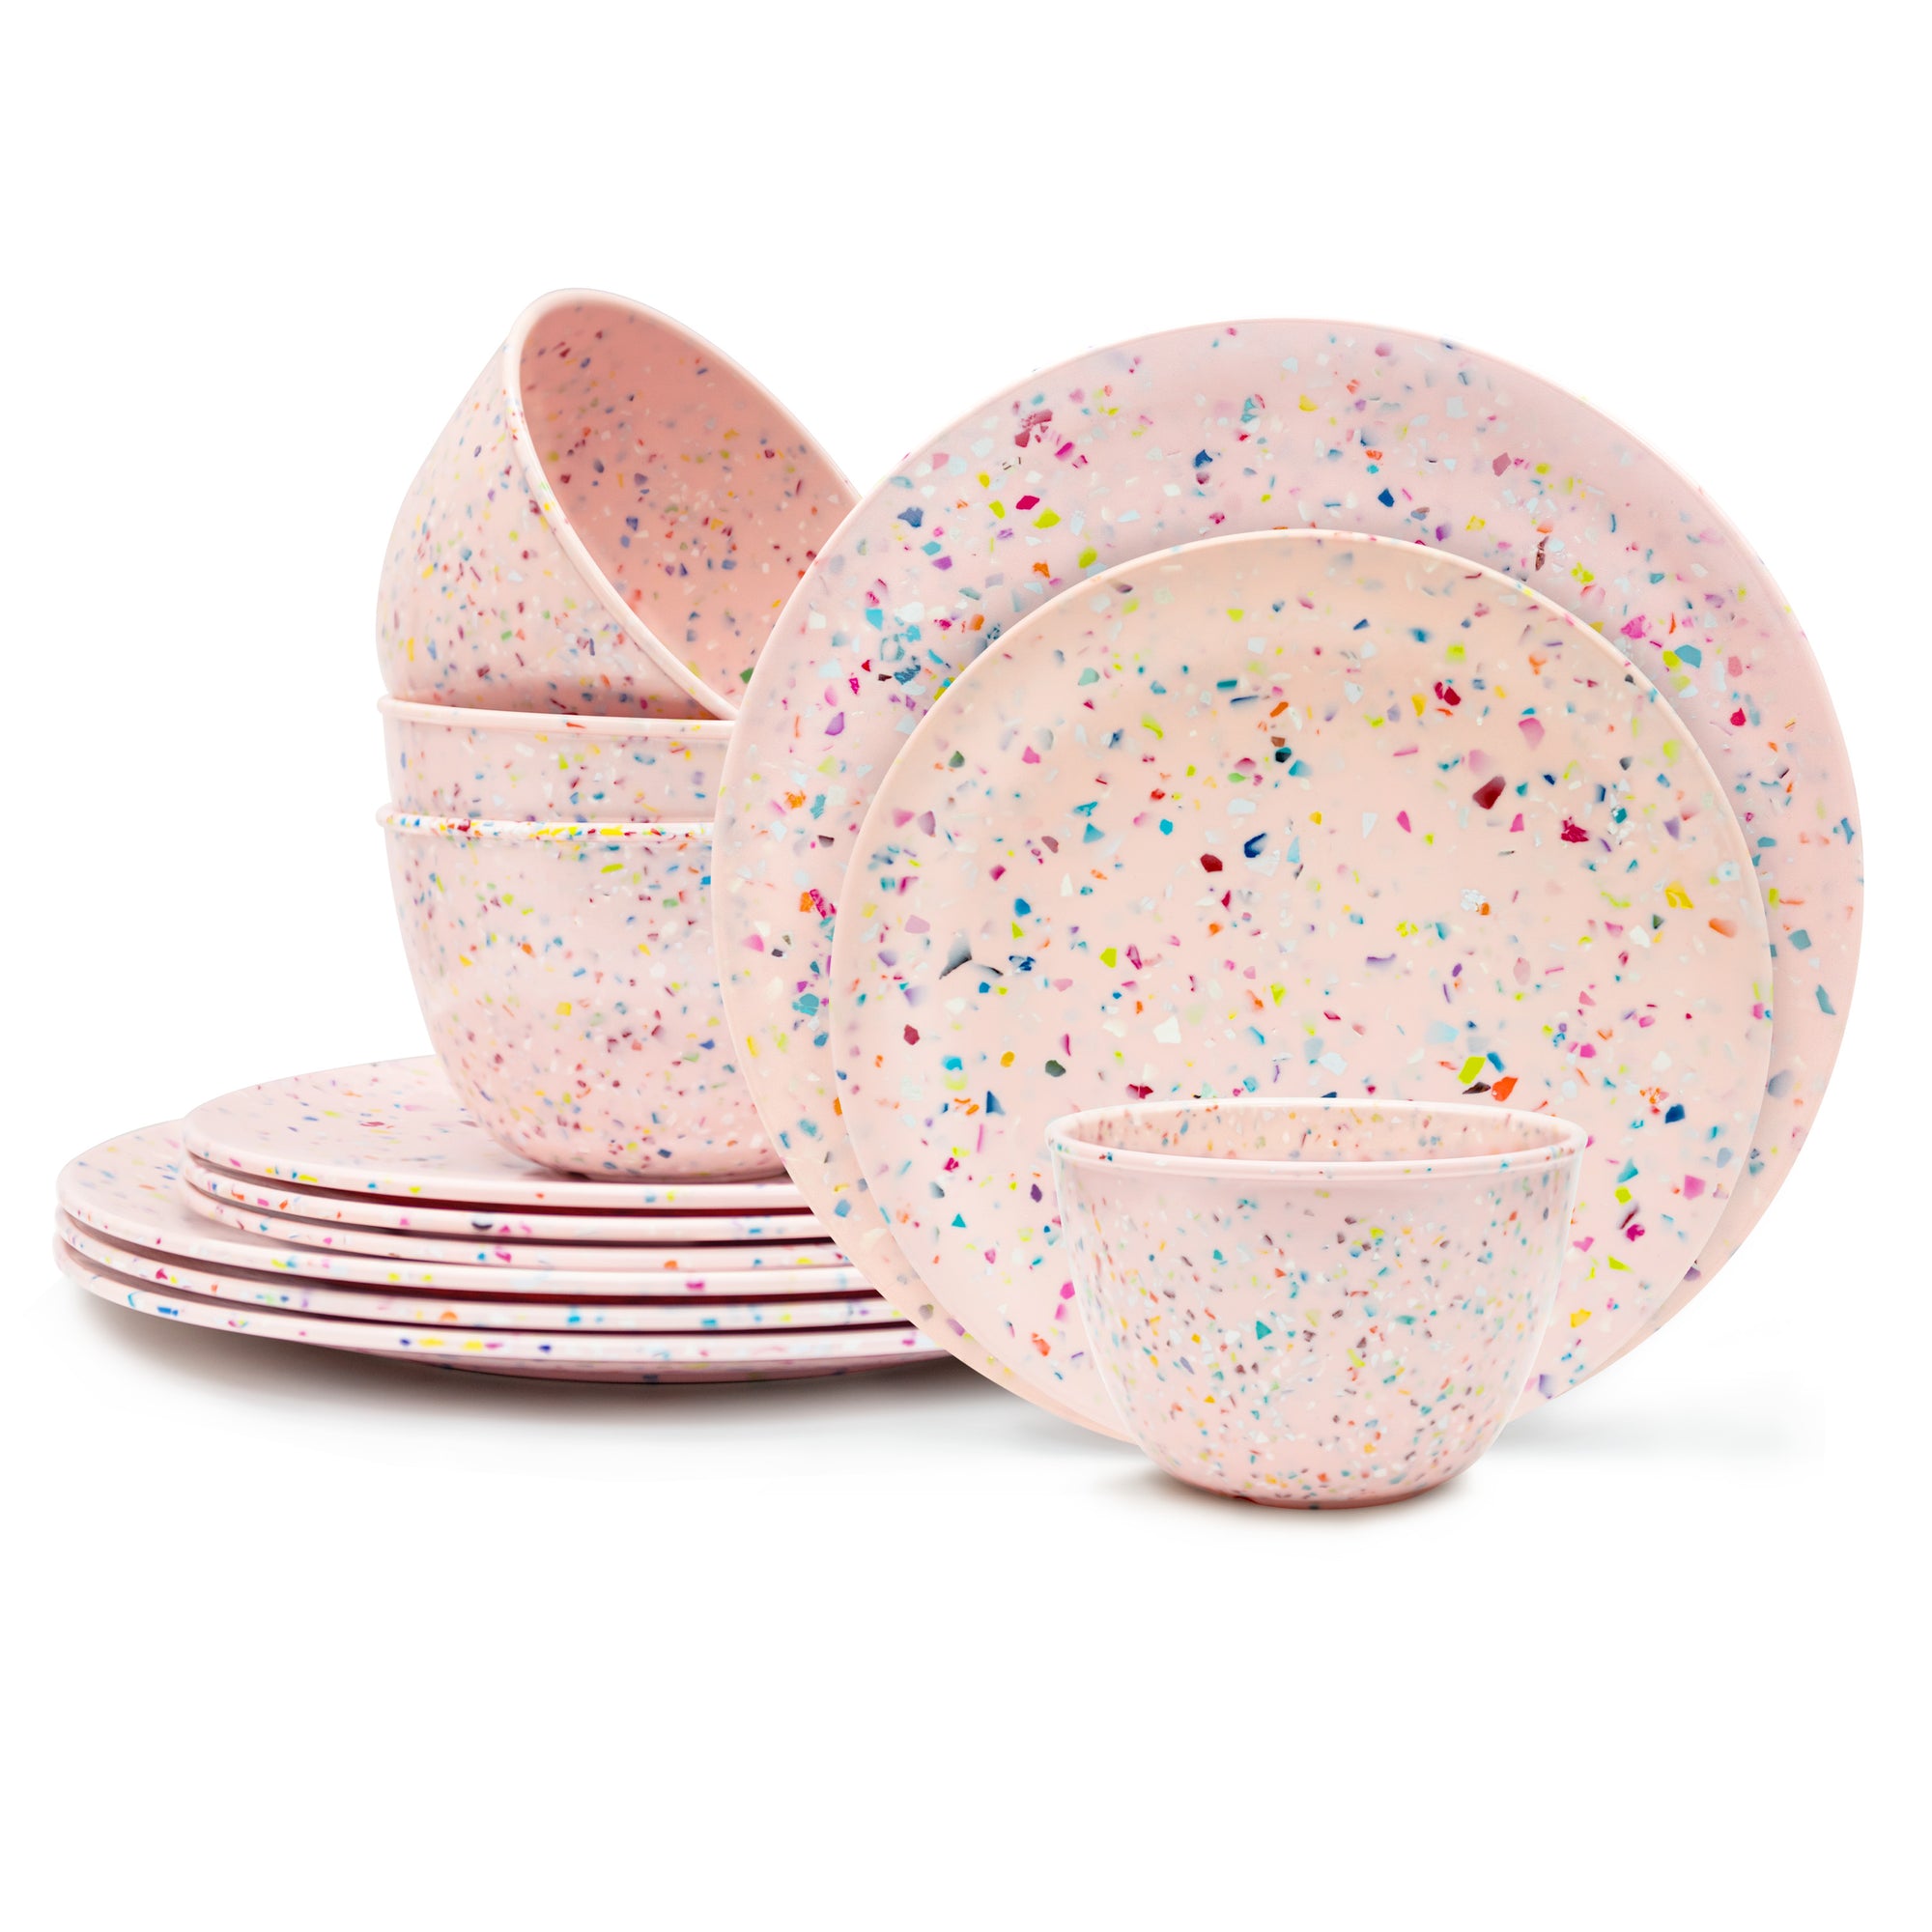 Confetti Melamine Dinnerware Set - Durable, Recycled Plates and Bowls, Pink